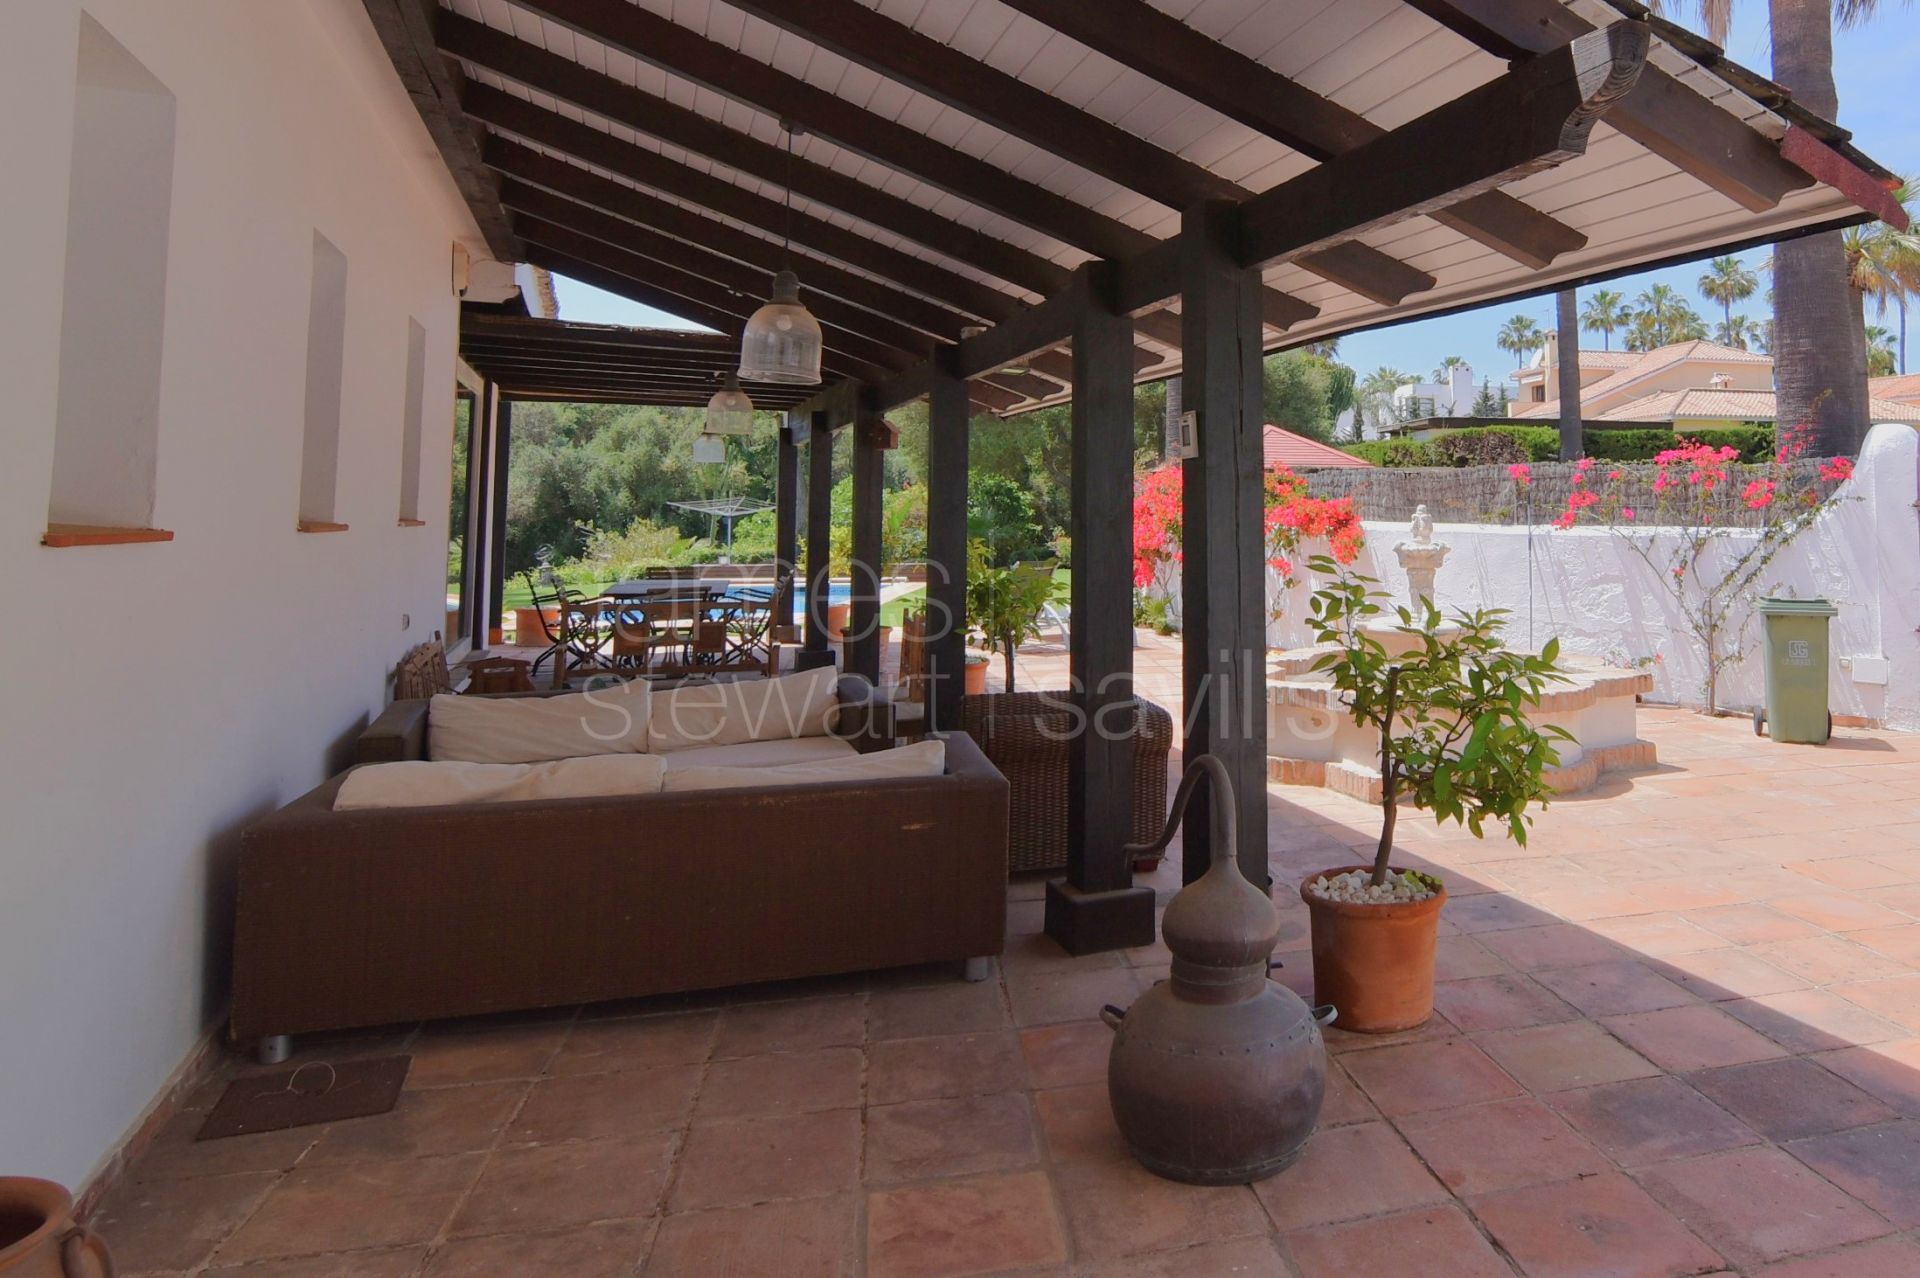 Characterful villa on originally 4 plots with lovely country views and guest house